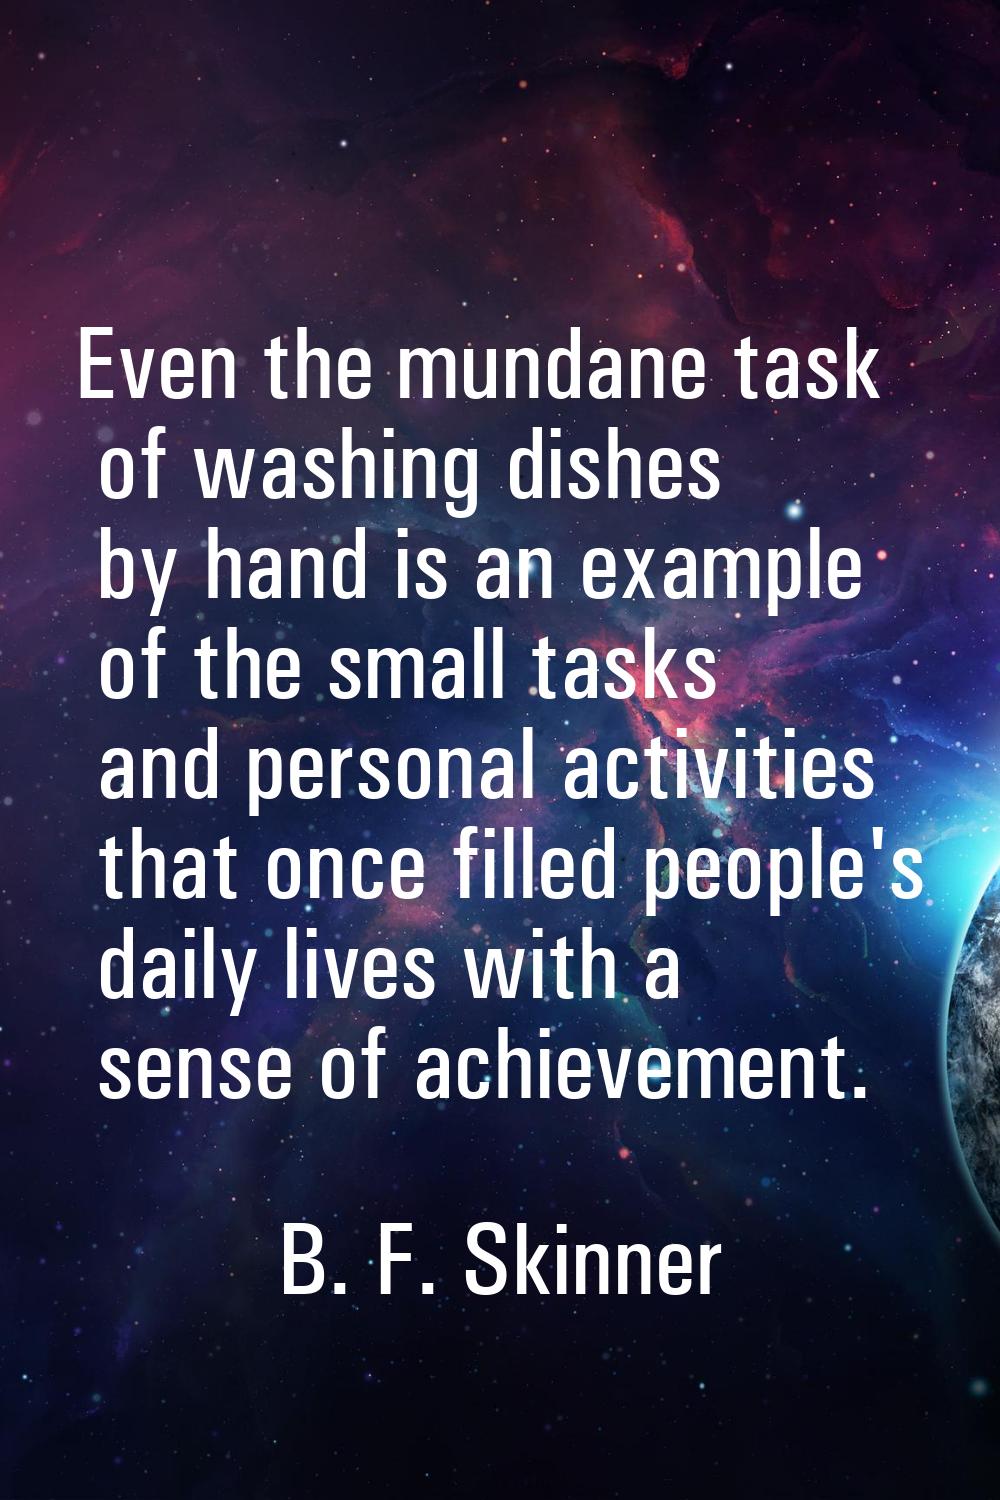 Even the mundane task of washing dishes by hand is an example of the small tasks and personal activ